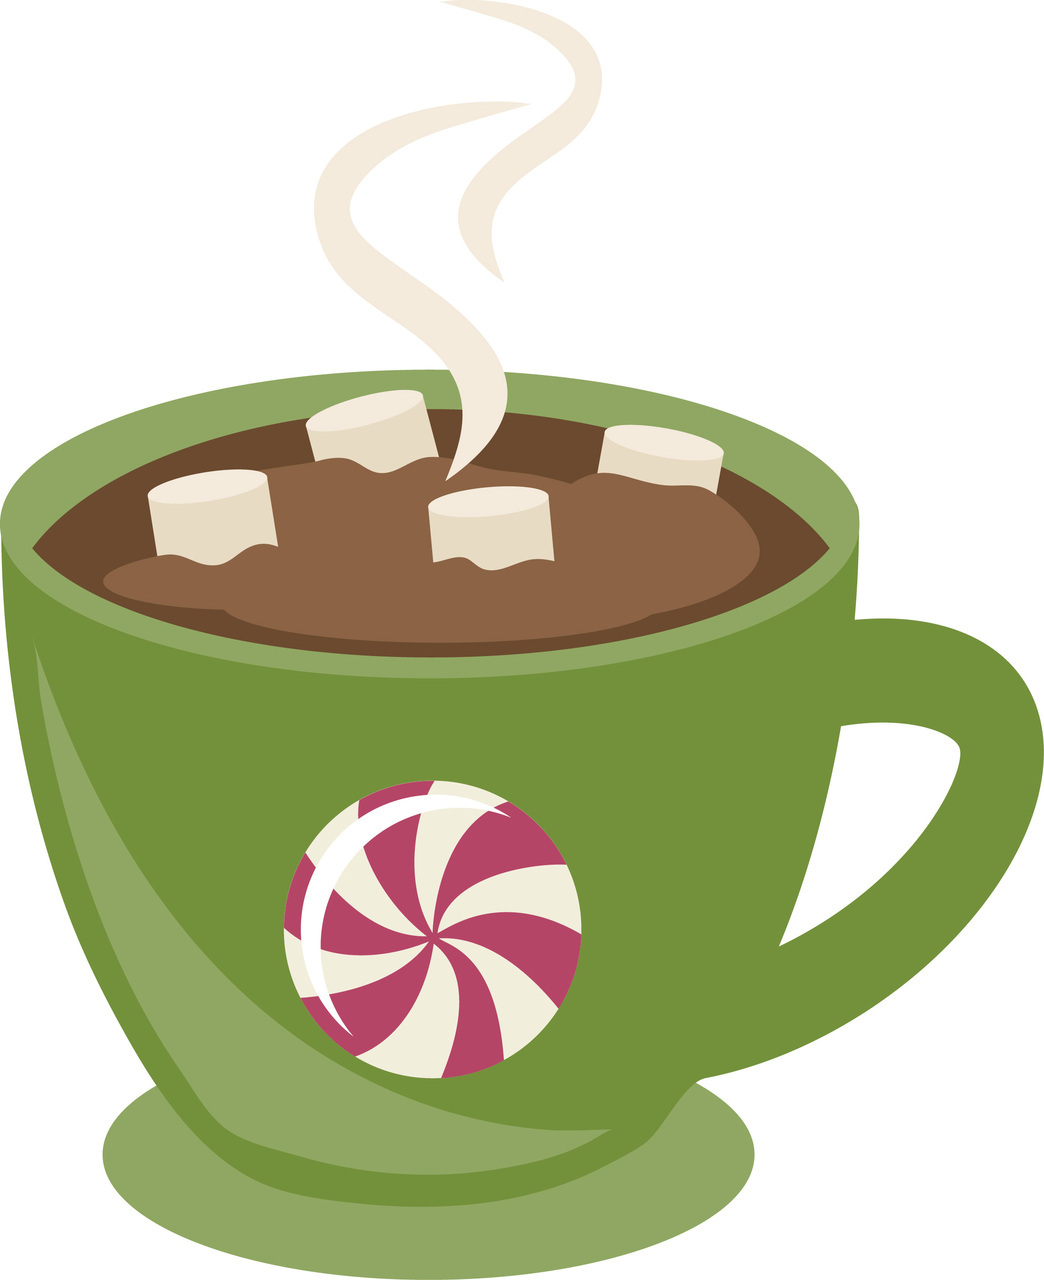 cup of hot chocolate clipart - photo #14